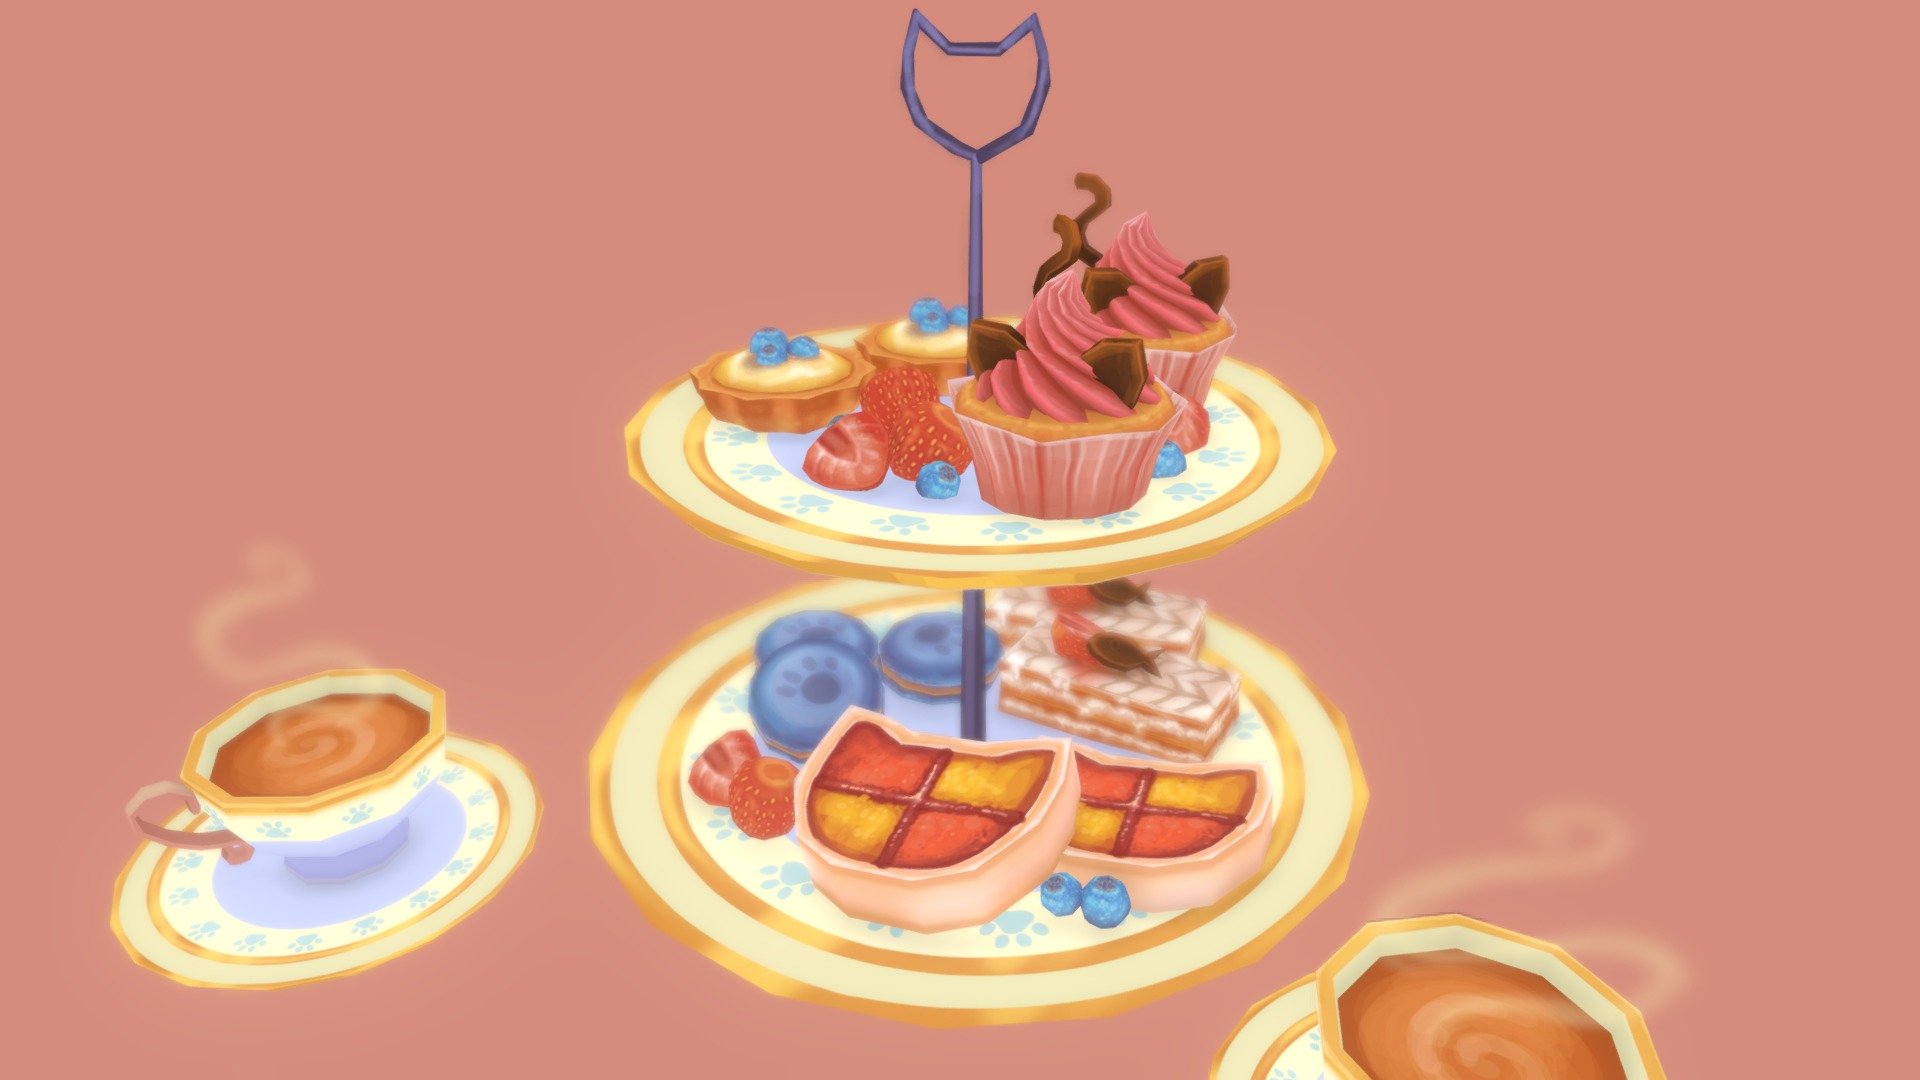 My entry for the Low poly dessert challenge! I decided to go for a cat themed afternoon tea. I created the concept , modelled in Maya and handpainted textures in Photoshop.  I really enjoyed making this! Created some music for it for fun , it is just Every body wants to be a cat in waltz time with some cat/cafe SFX over it.

https://twitter.com/rosiejarvisart
.
.
https://www.artstation.com/rosiejarvis - Cat themed afternoon tea - 3D model by rosiejarvis 3d model